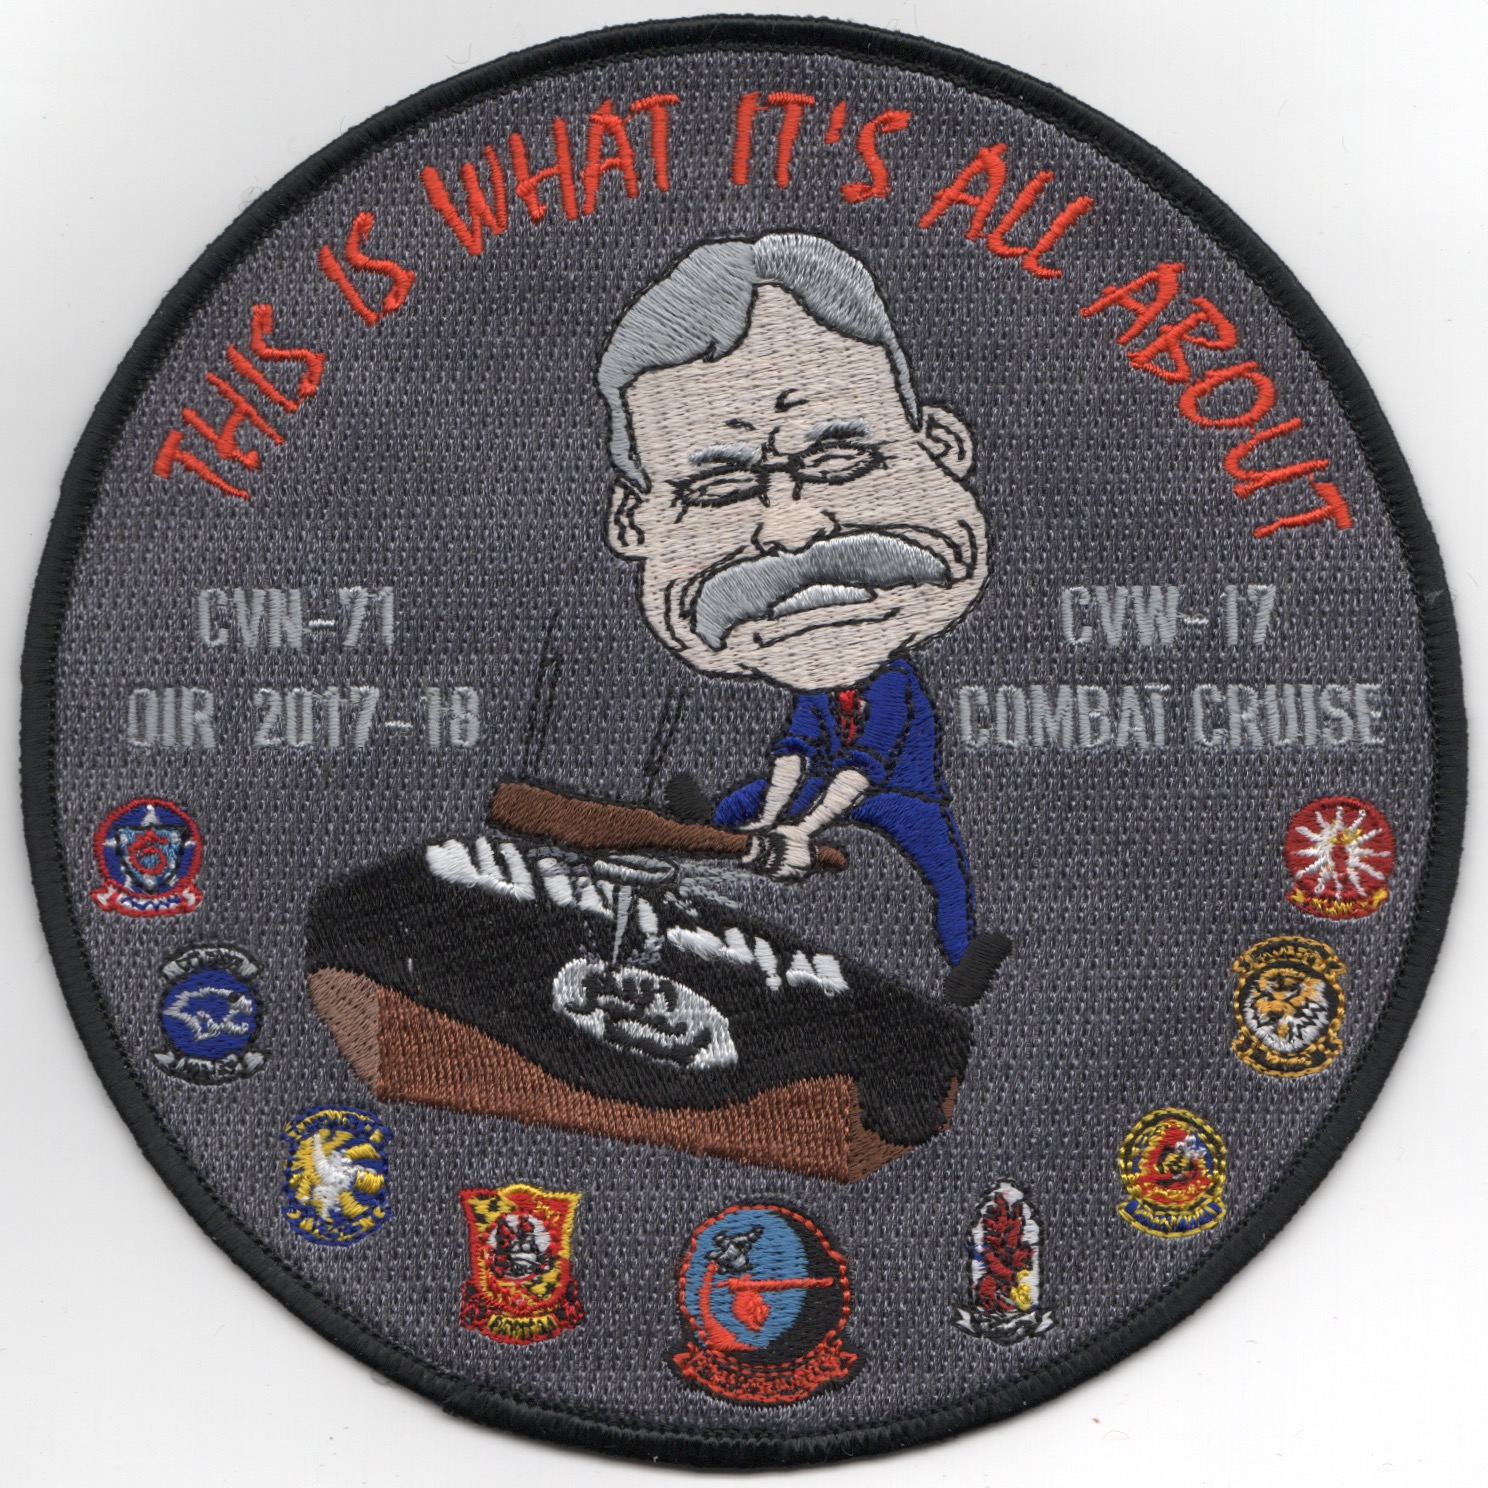 VFA-94 2017 OIR 'All About' Patch (Large)